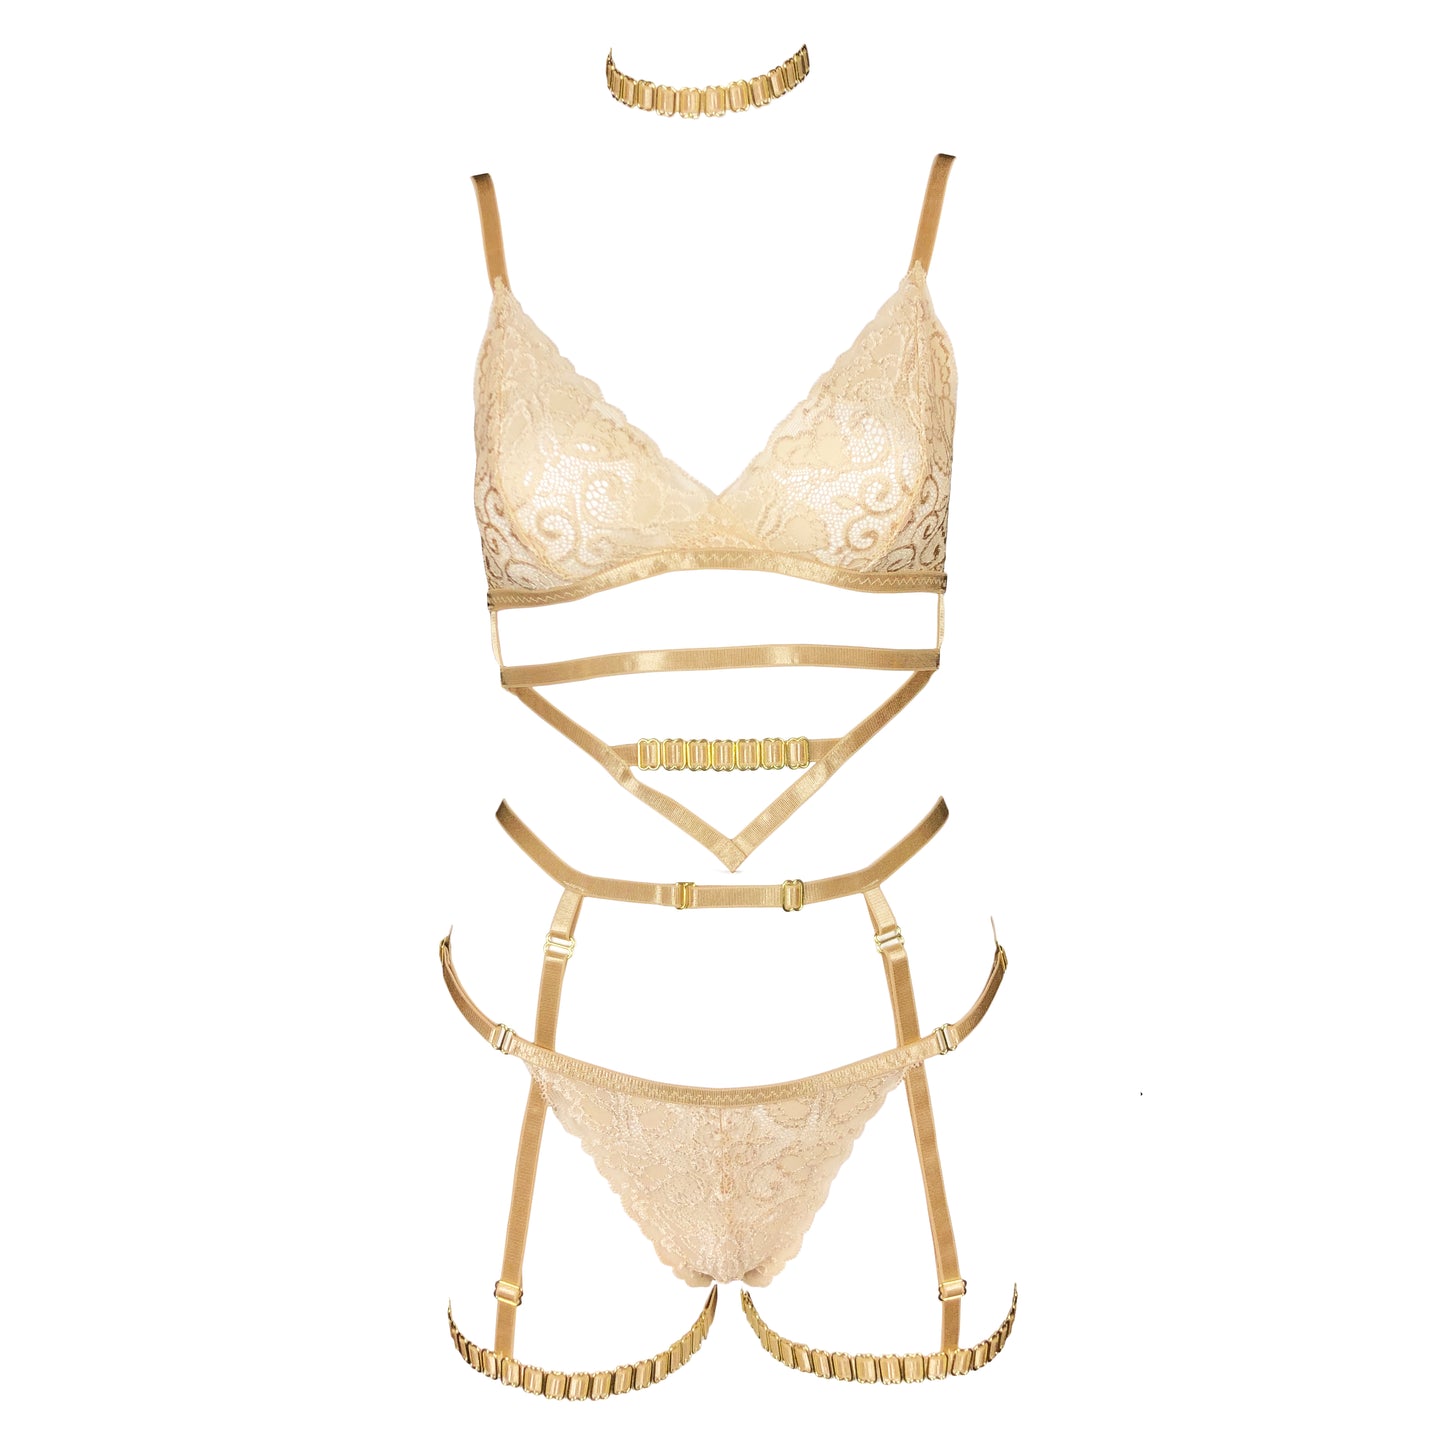 24k Gold lace lingerie set with crotchless panties and garters in champagne